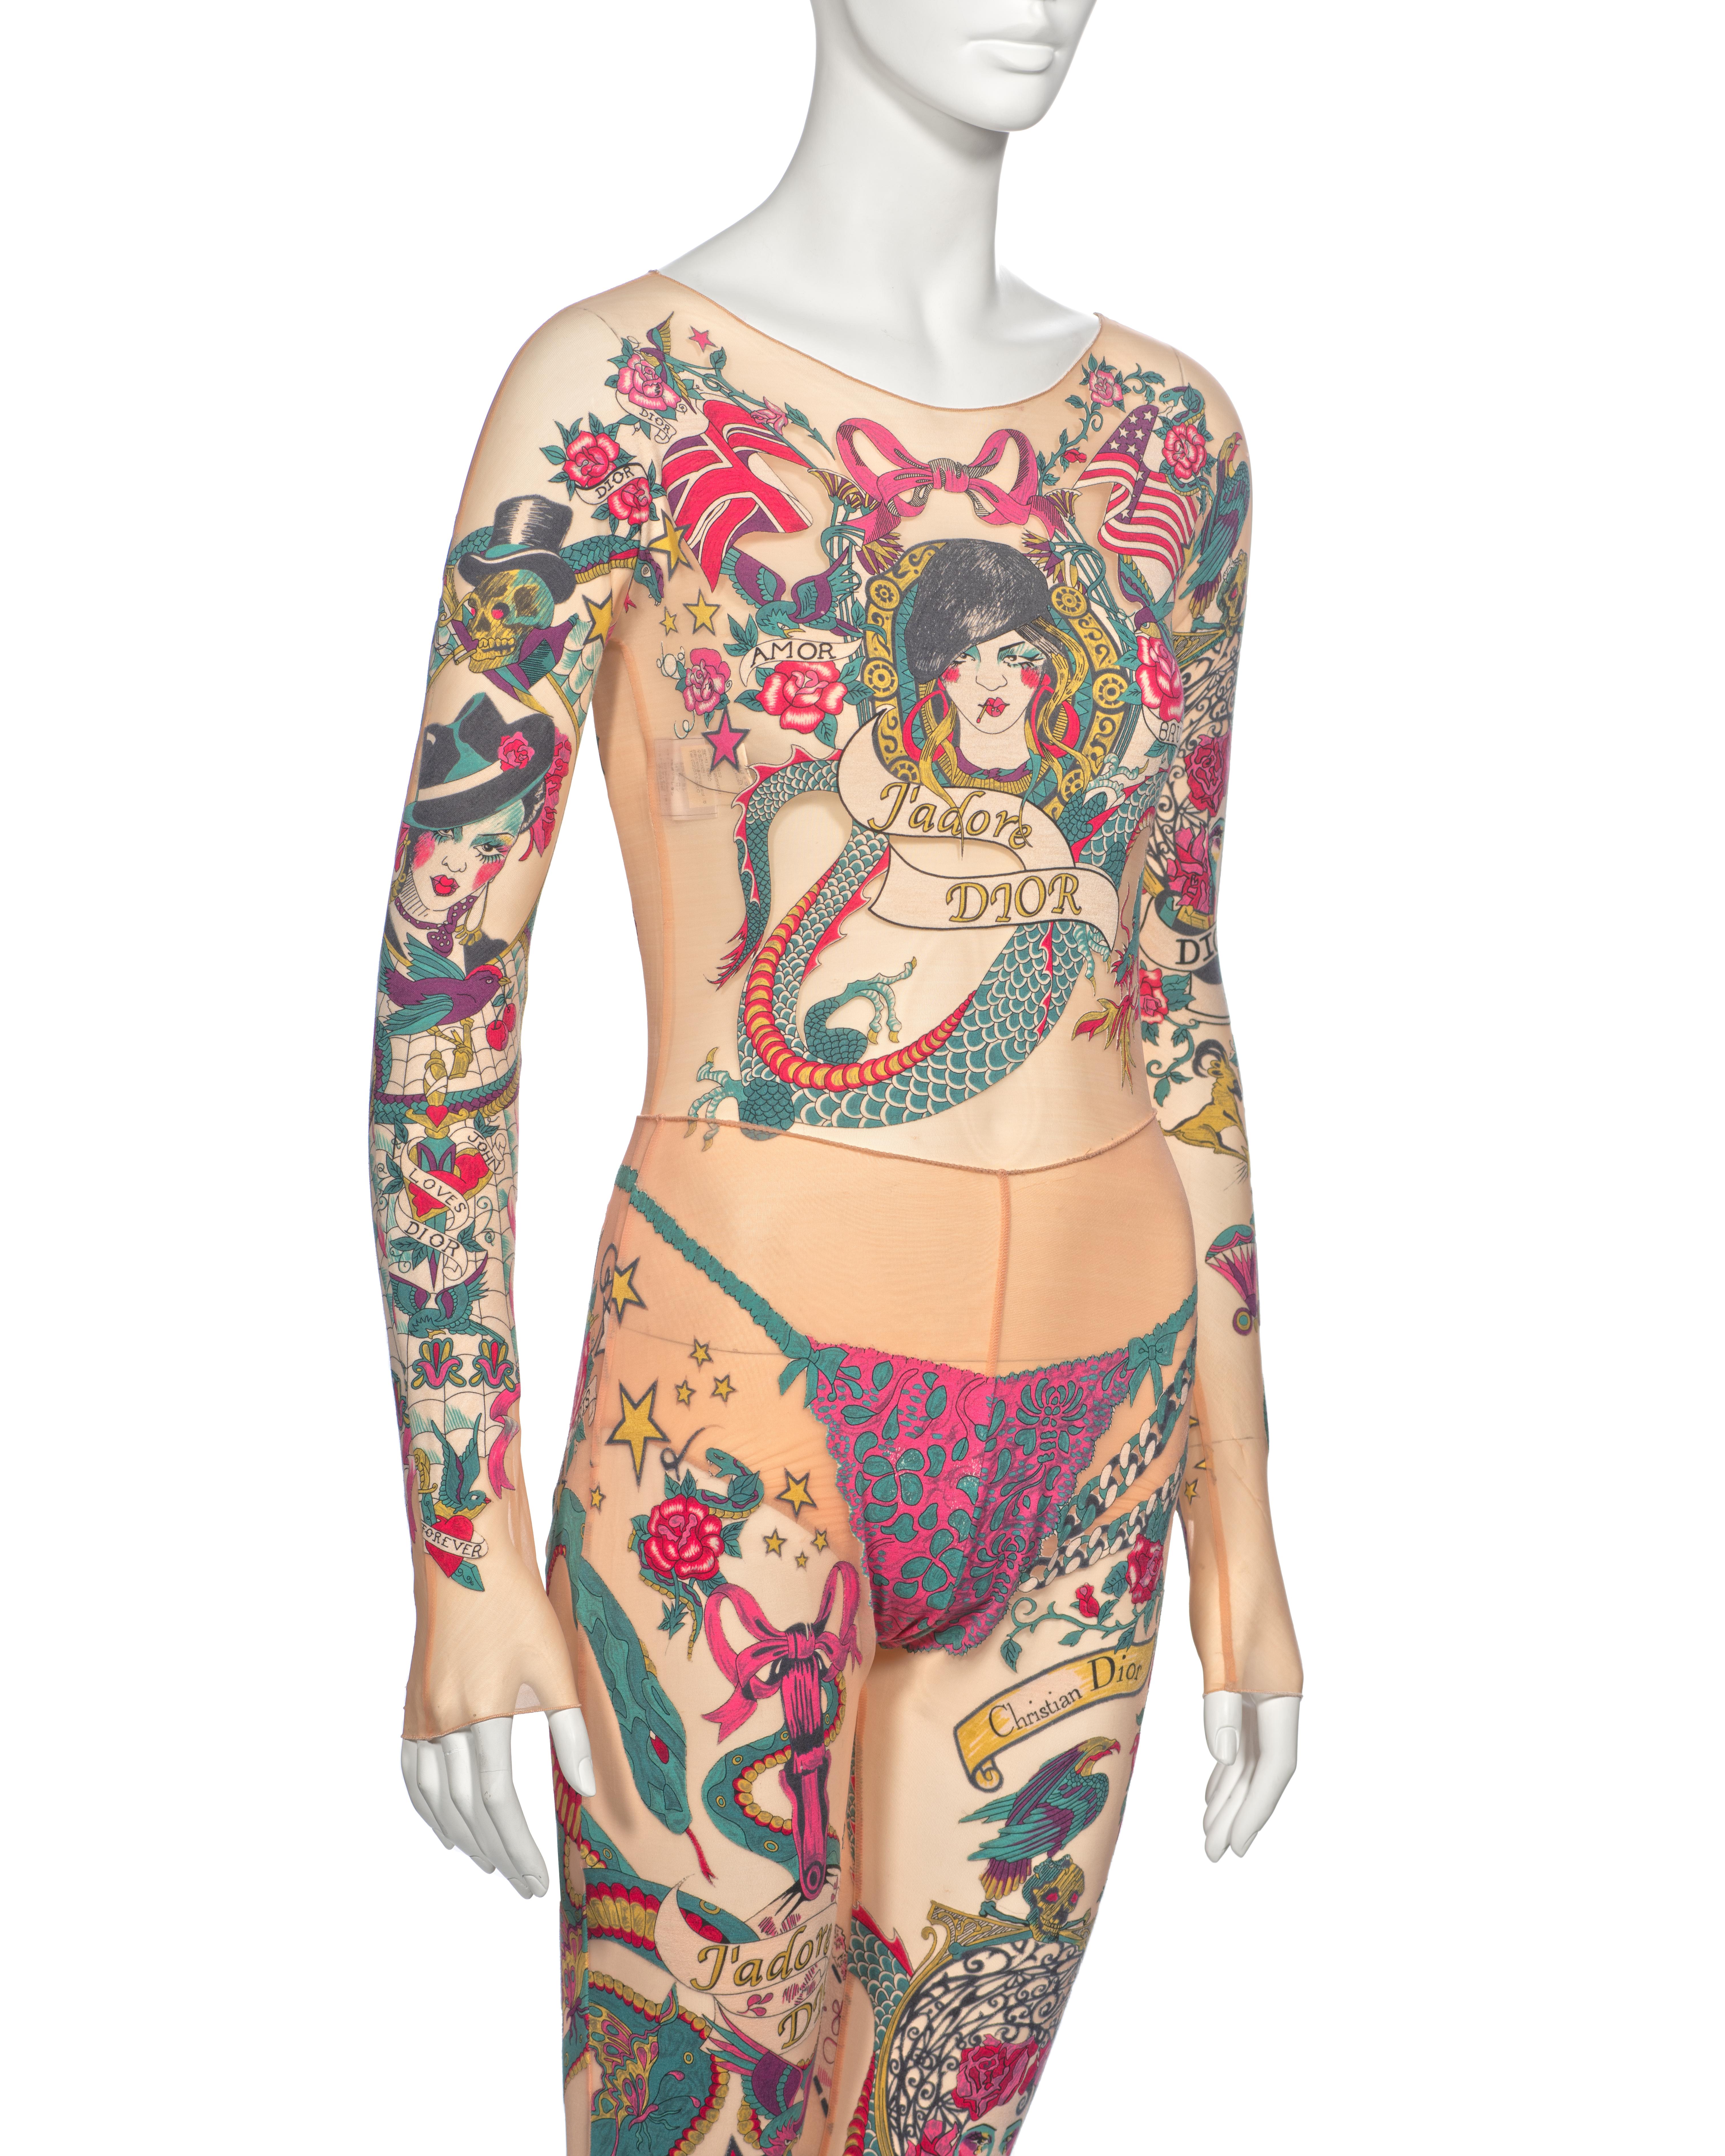 Christian Dior by John Galliano Tattoo Print Body, Leggings and Skirt, ss 2004 For Sale 7